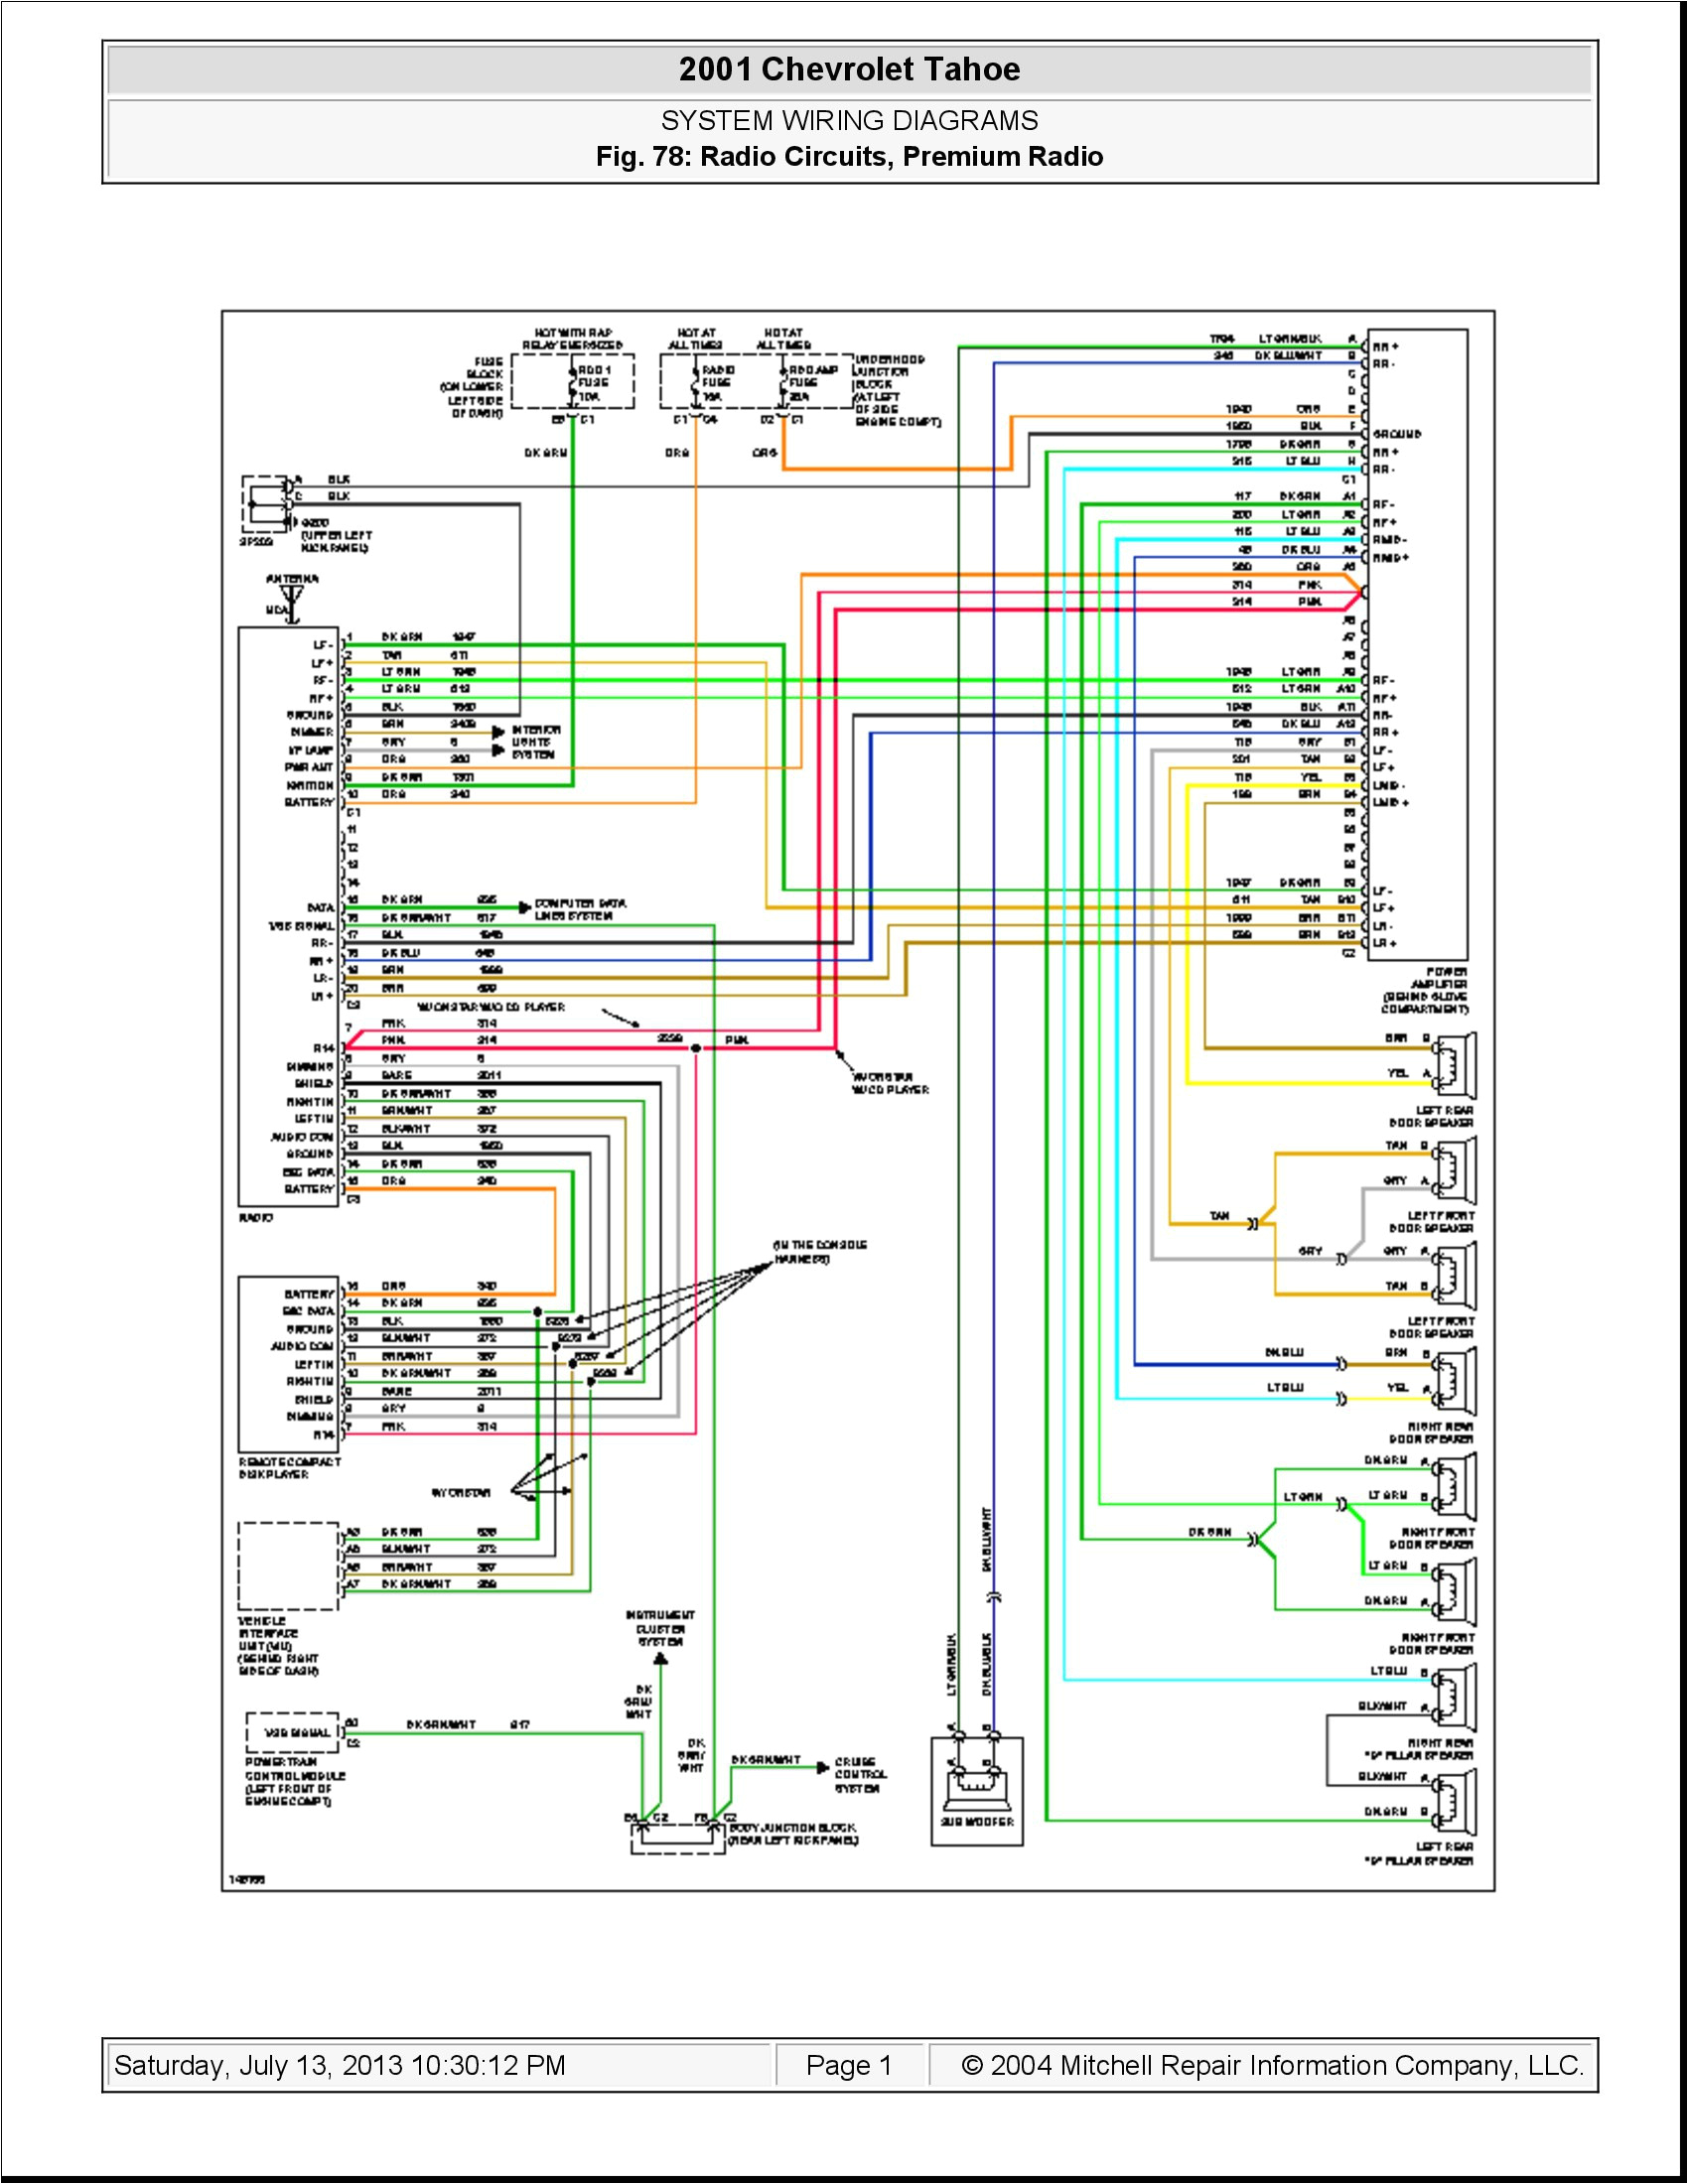 hummer h2 window wiring diagram wiring library 2006 hummer h3 wiring diagrams 2006 uplander wiring diagram